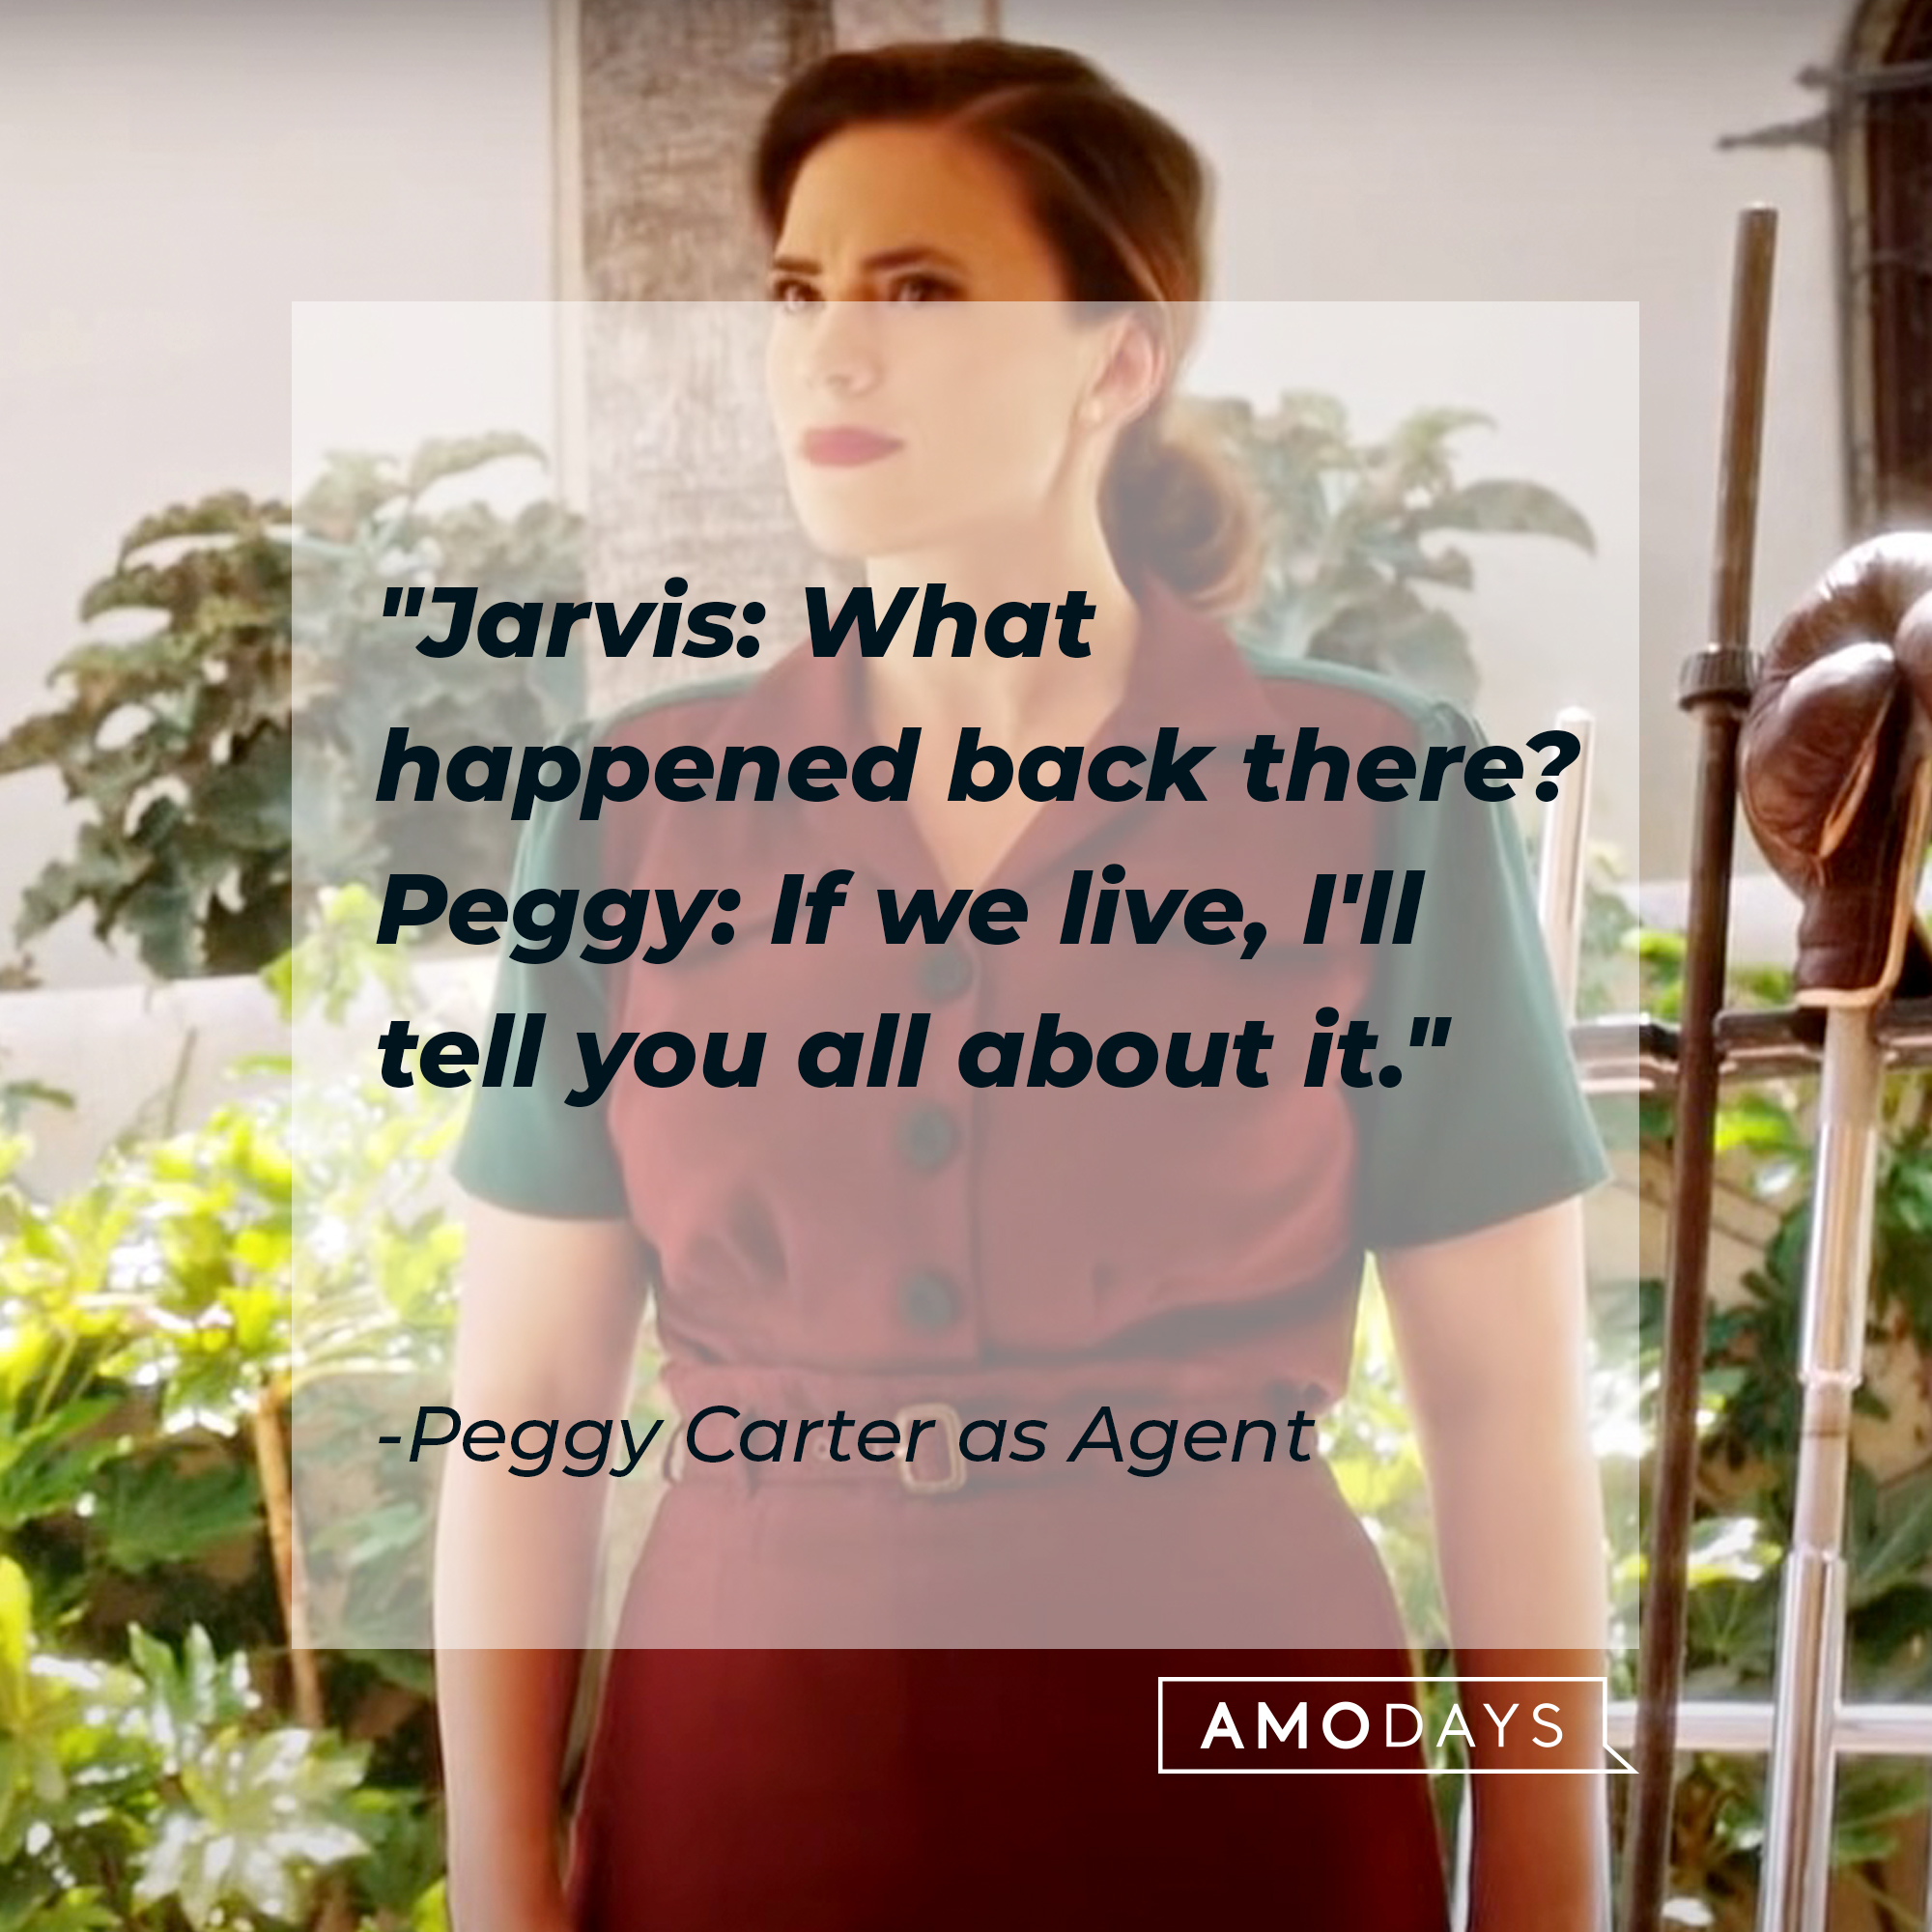 Peggy Carter as Agent's quote: "Jarvis: What happened back there? / Peggy: If we live, I'll tell you all about it." | Source: Facebook.com/marvelstudios